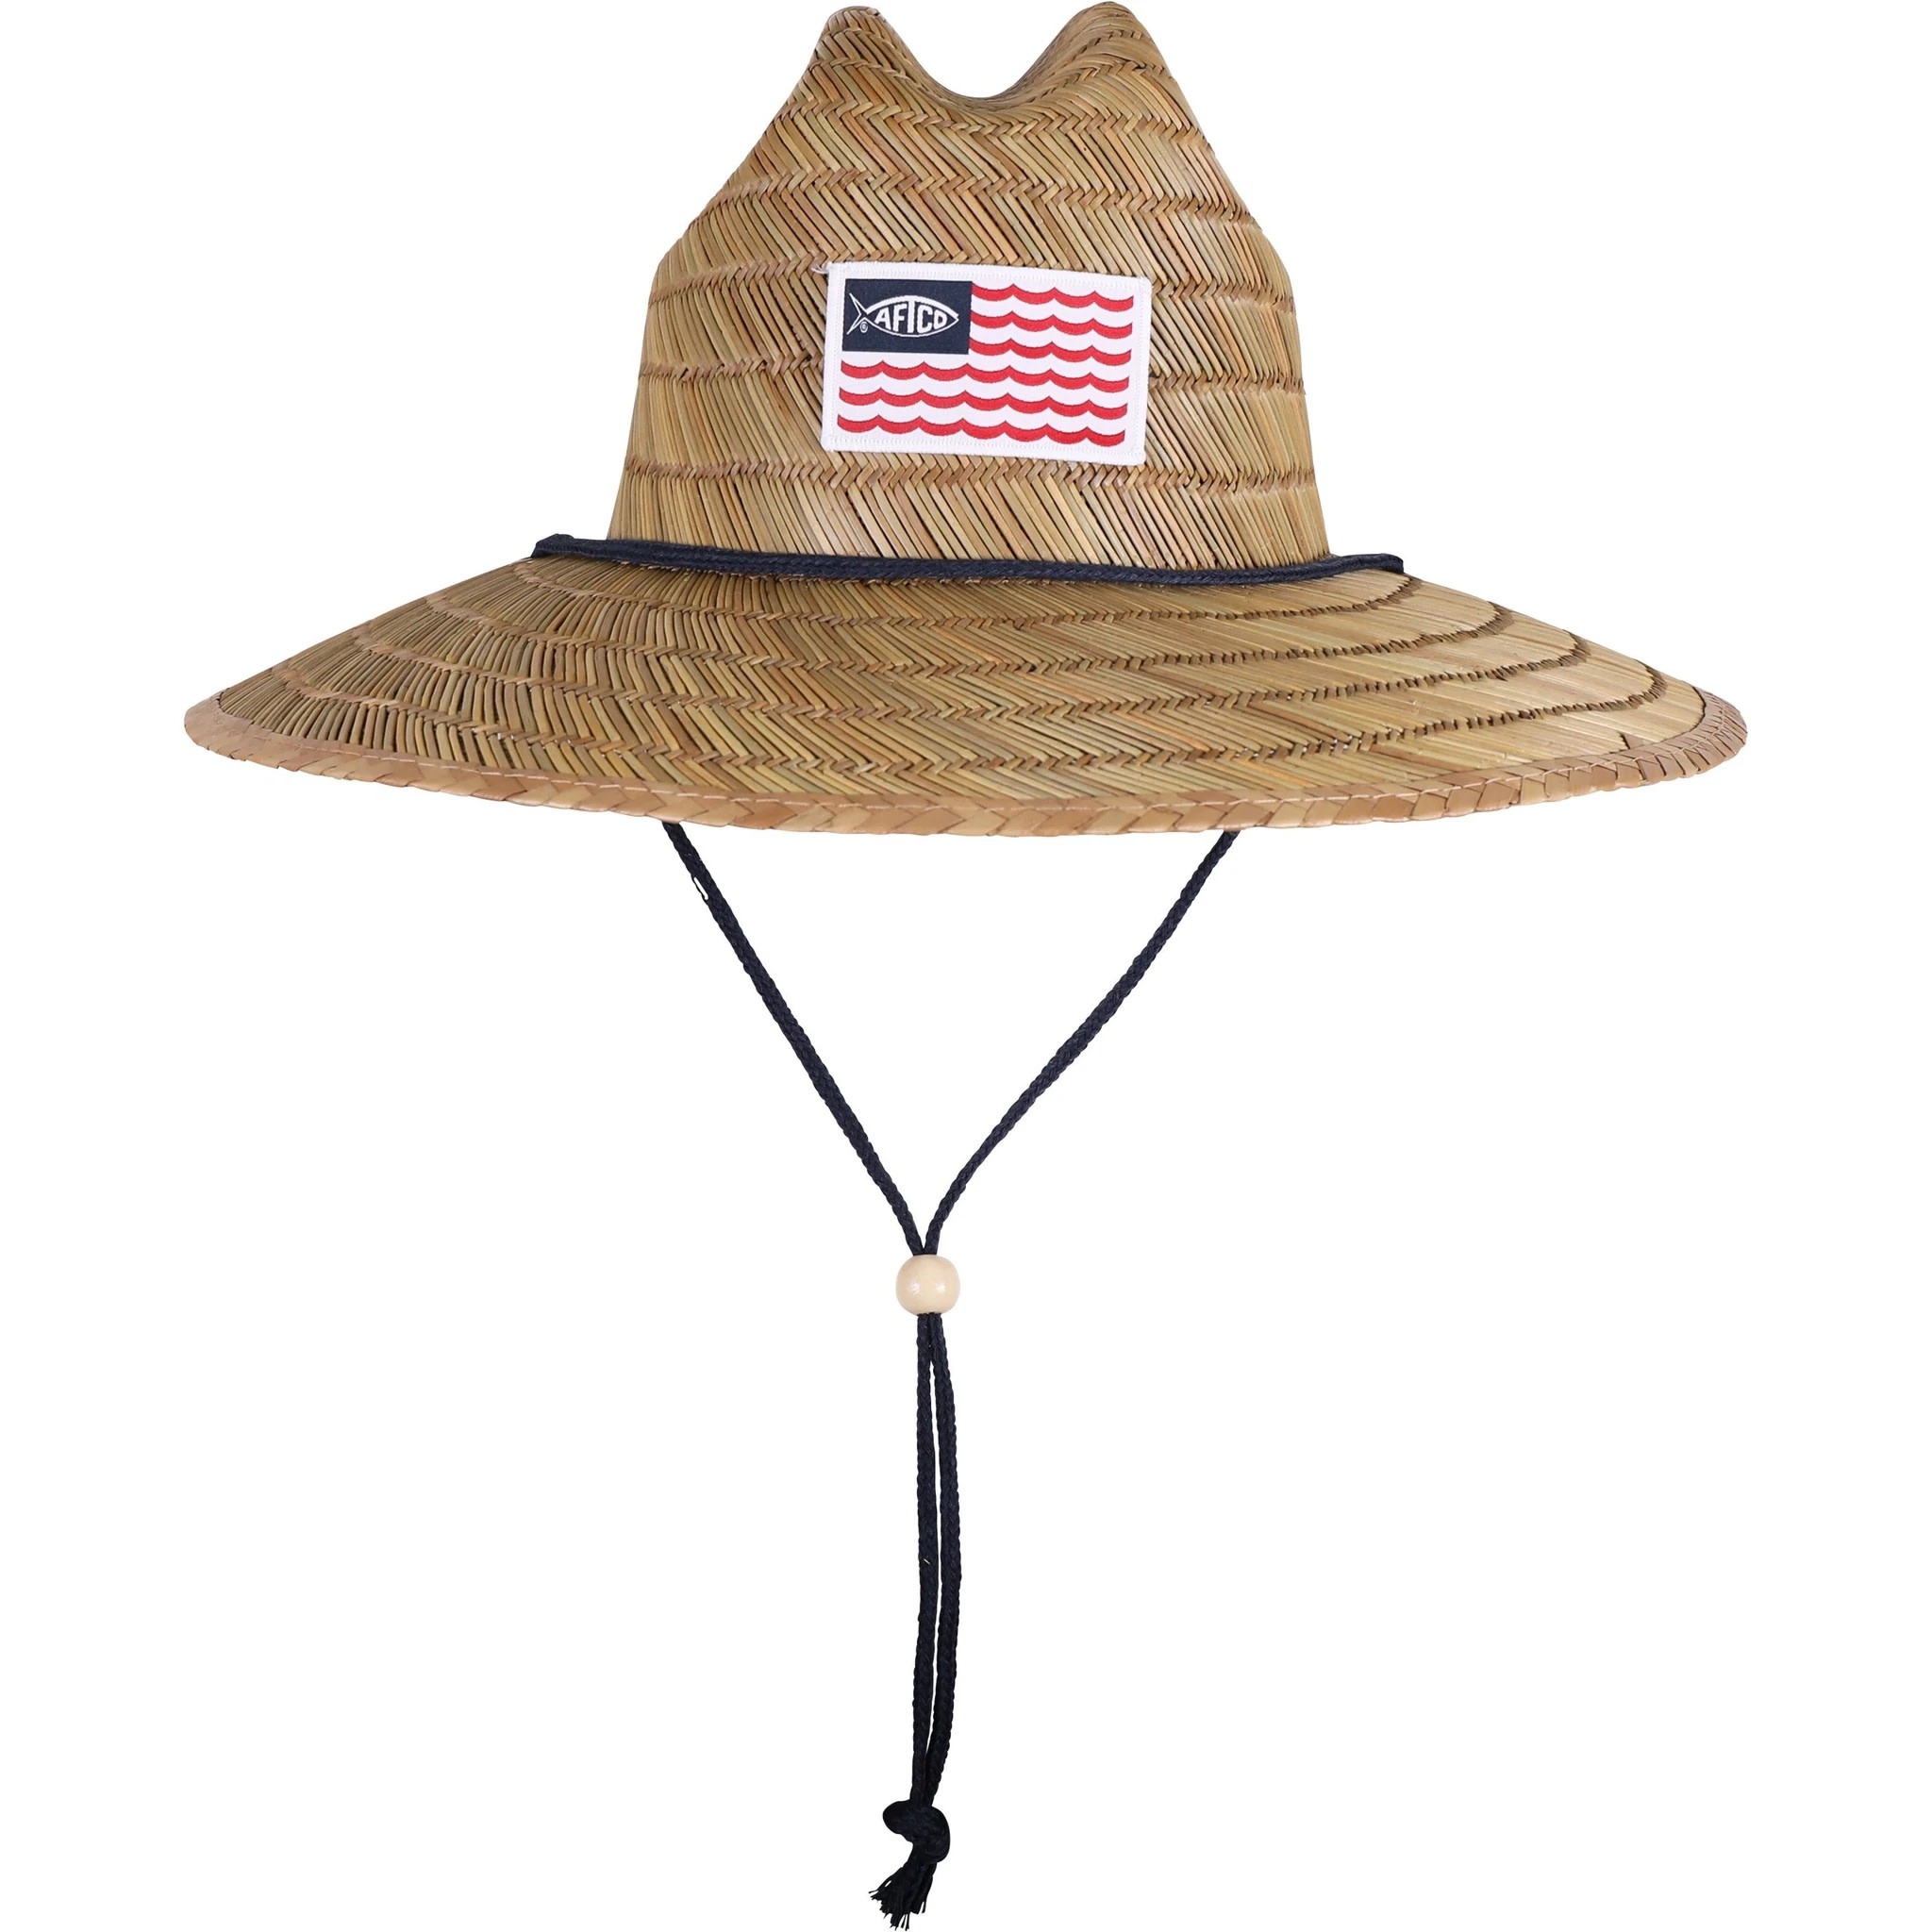 Aftco Palapa Straw Hat